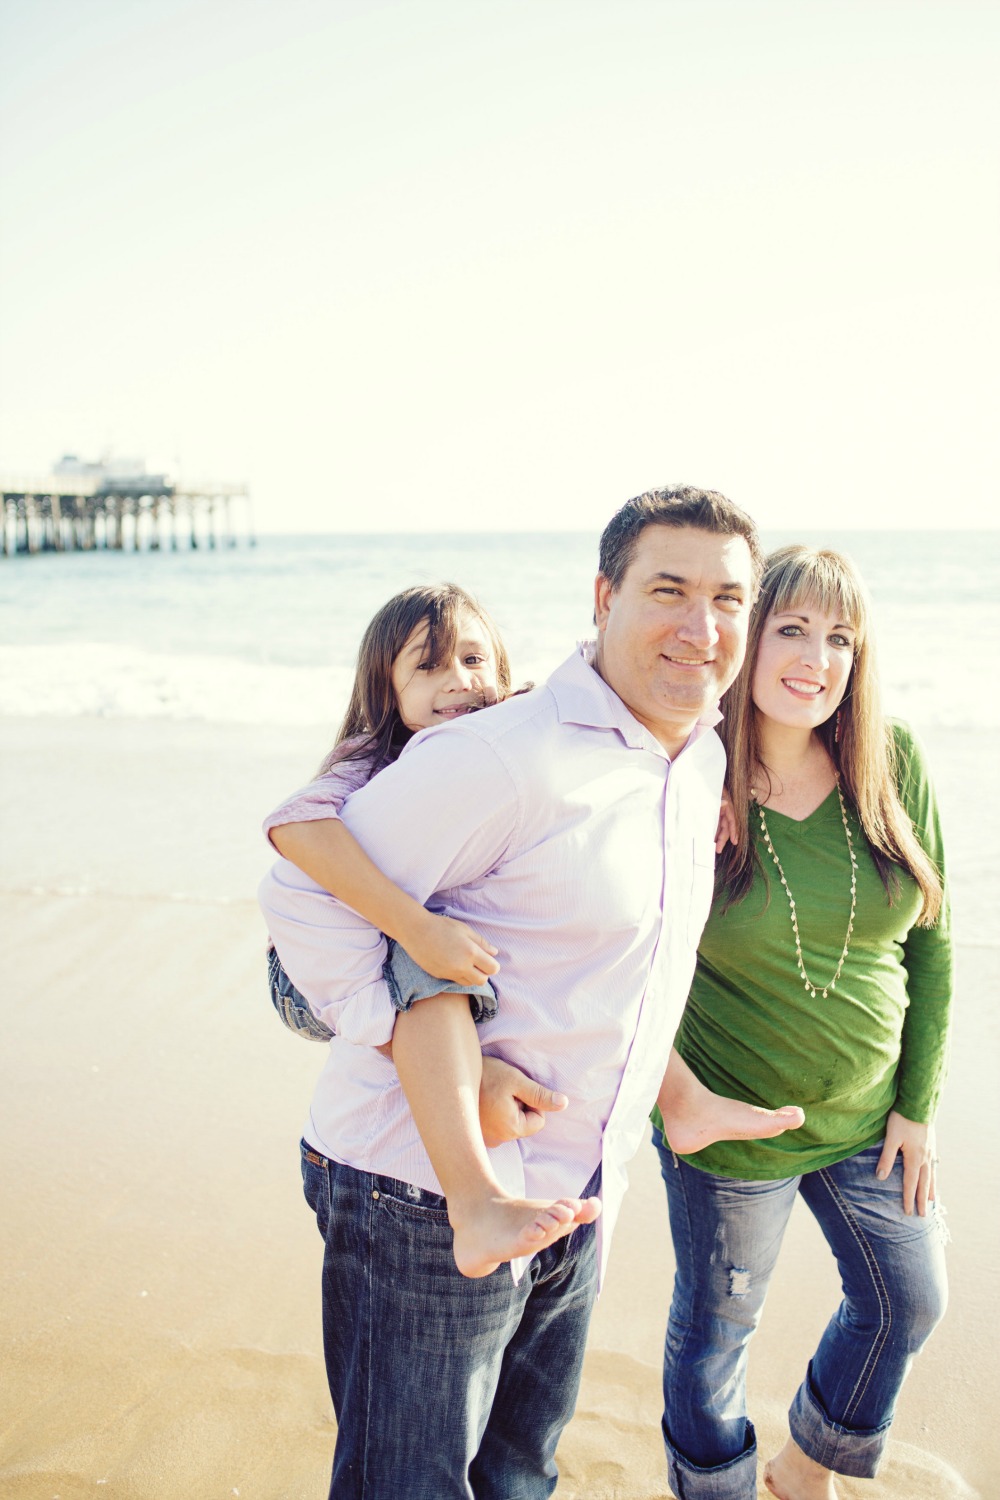 Family photos on the beach are one of our 10 reasons to plan a family beach vacation.